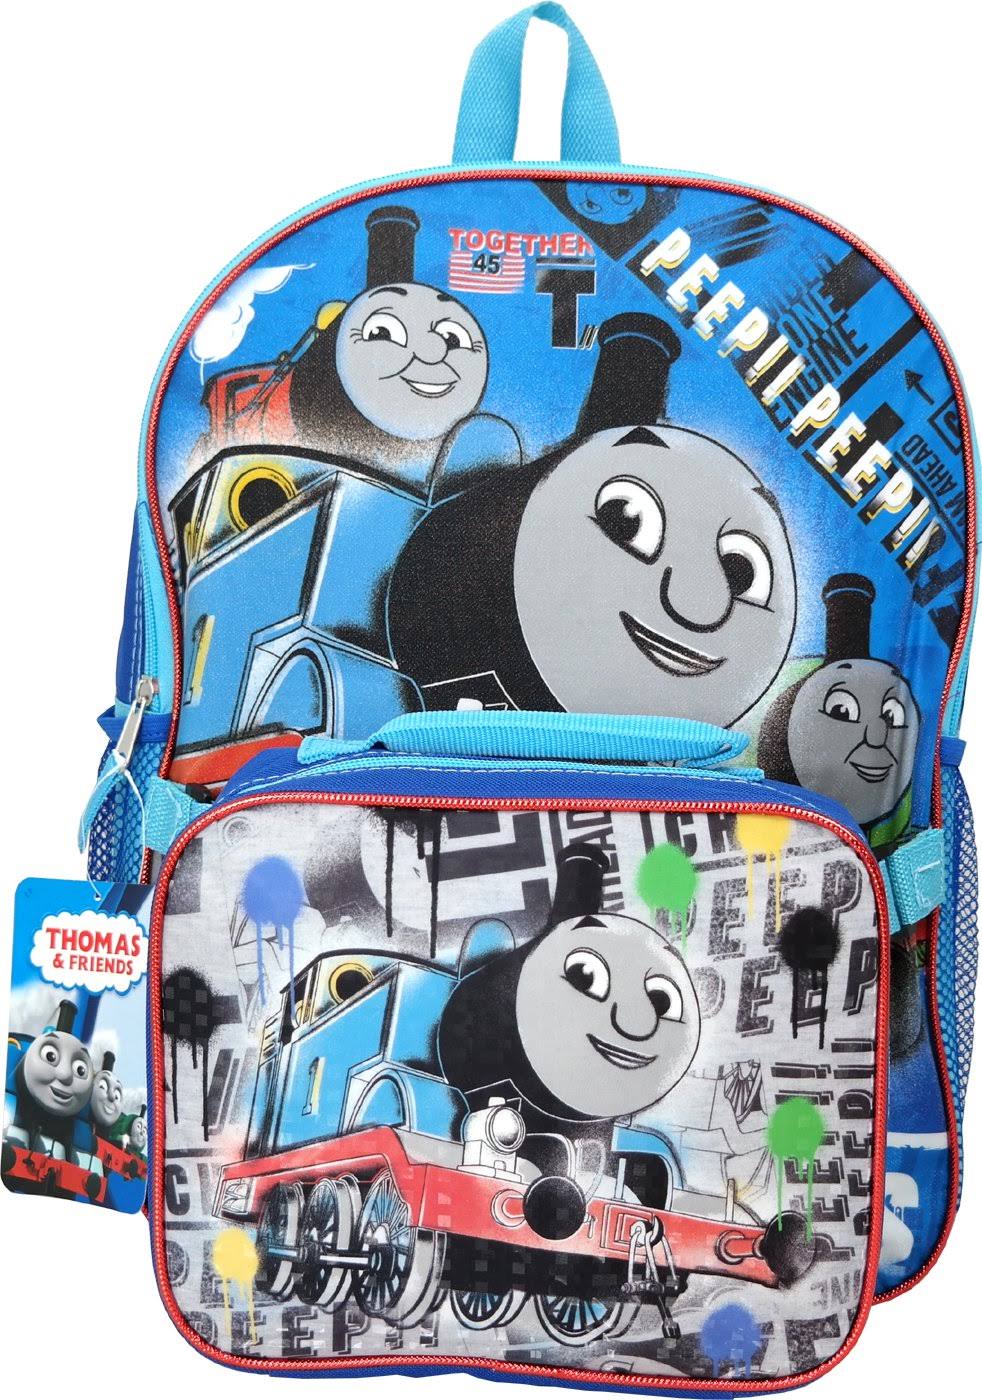 Thomas The Train 16" Backpack with Lunch Bag